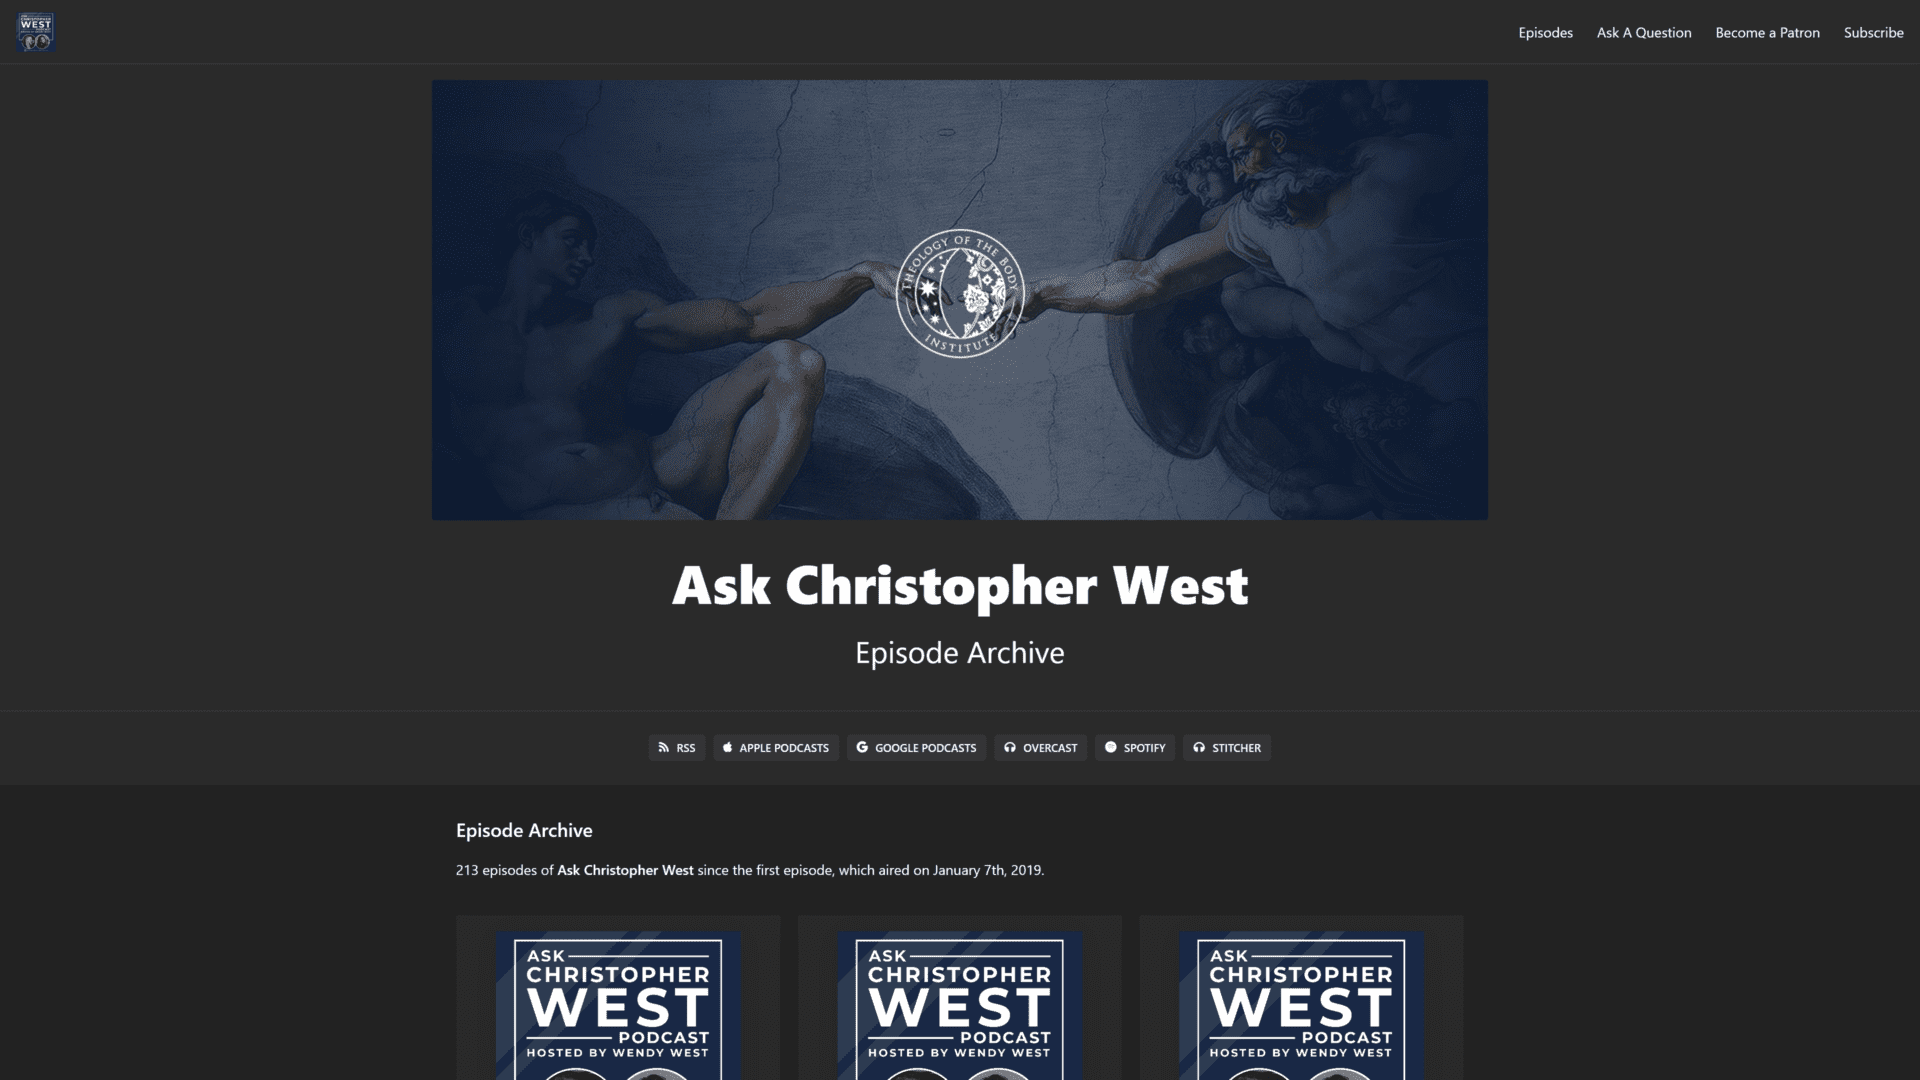 A screenshot of the ask christopher west homepage